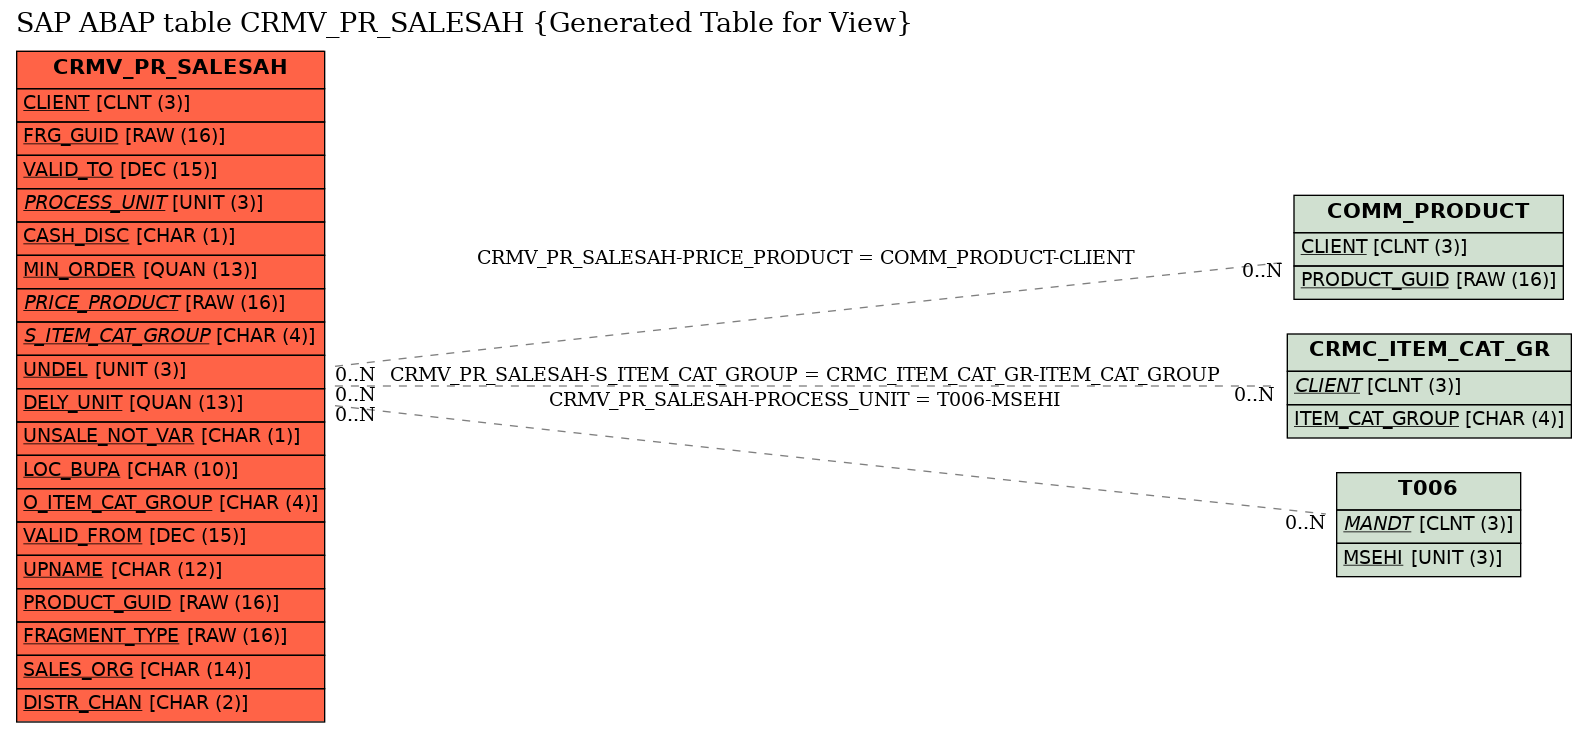 E-R Diagram for table CRMV_PR_SALESAH (Generated Table for View)